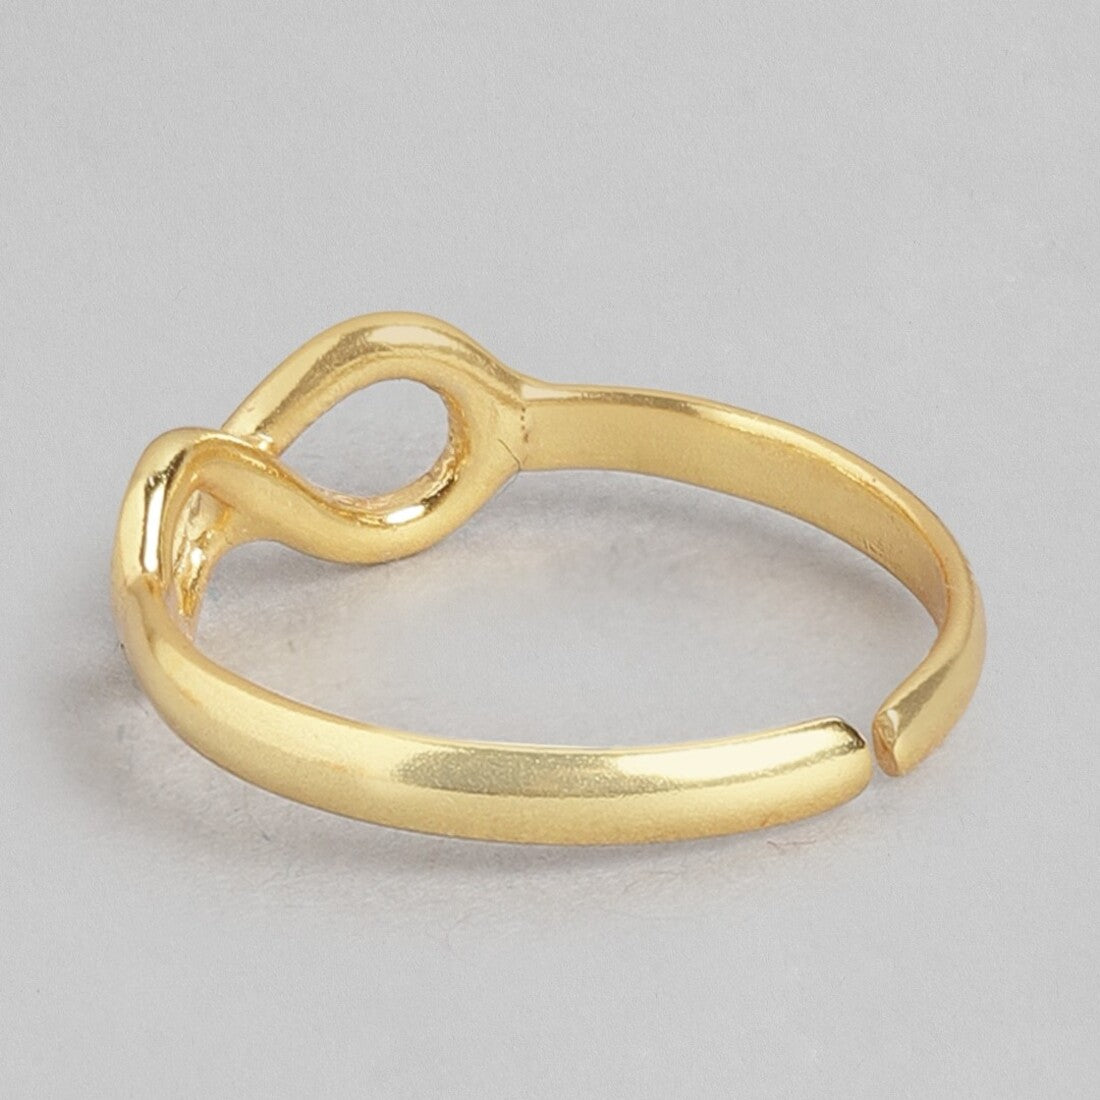 Eternal Love Gold-Plated 925 Sterling Silver Infinity Ring